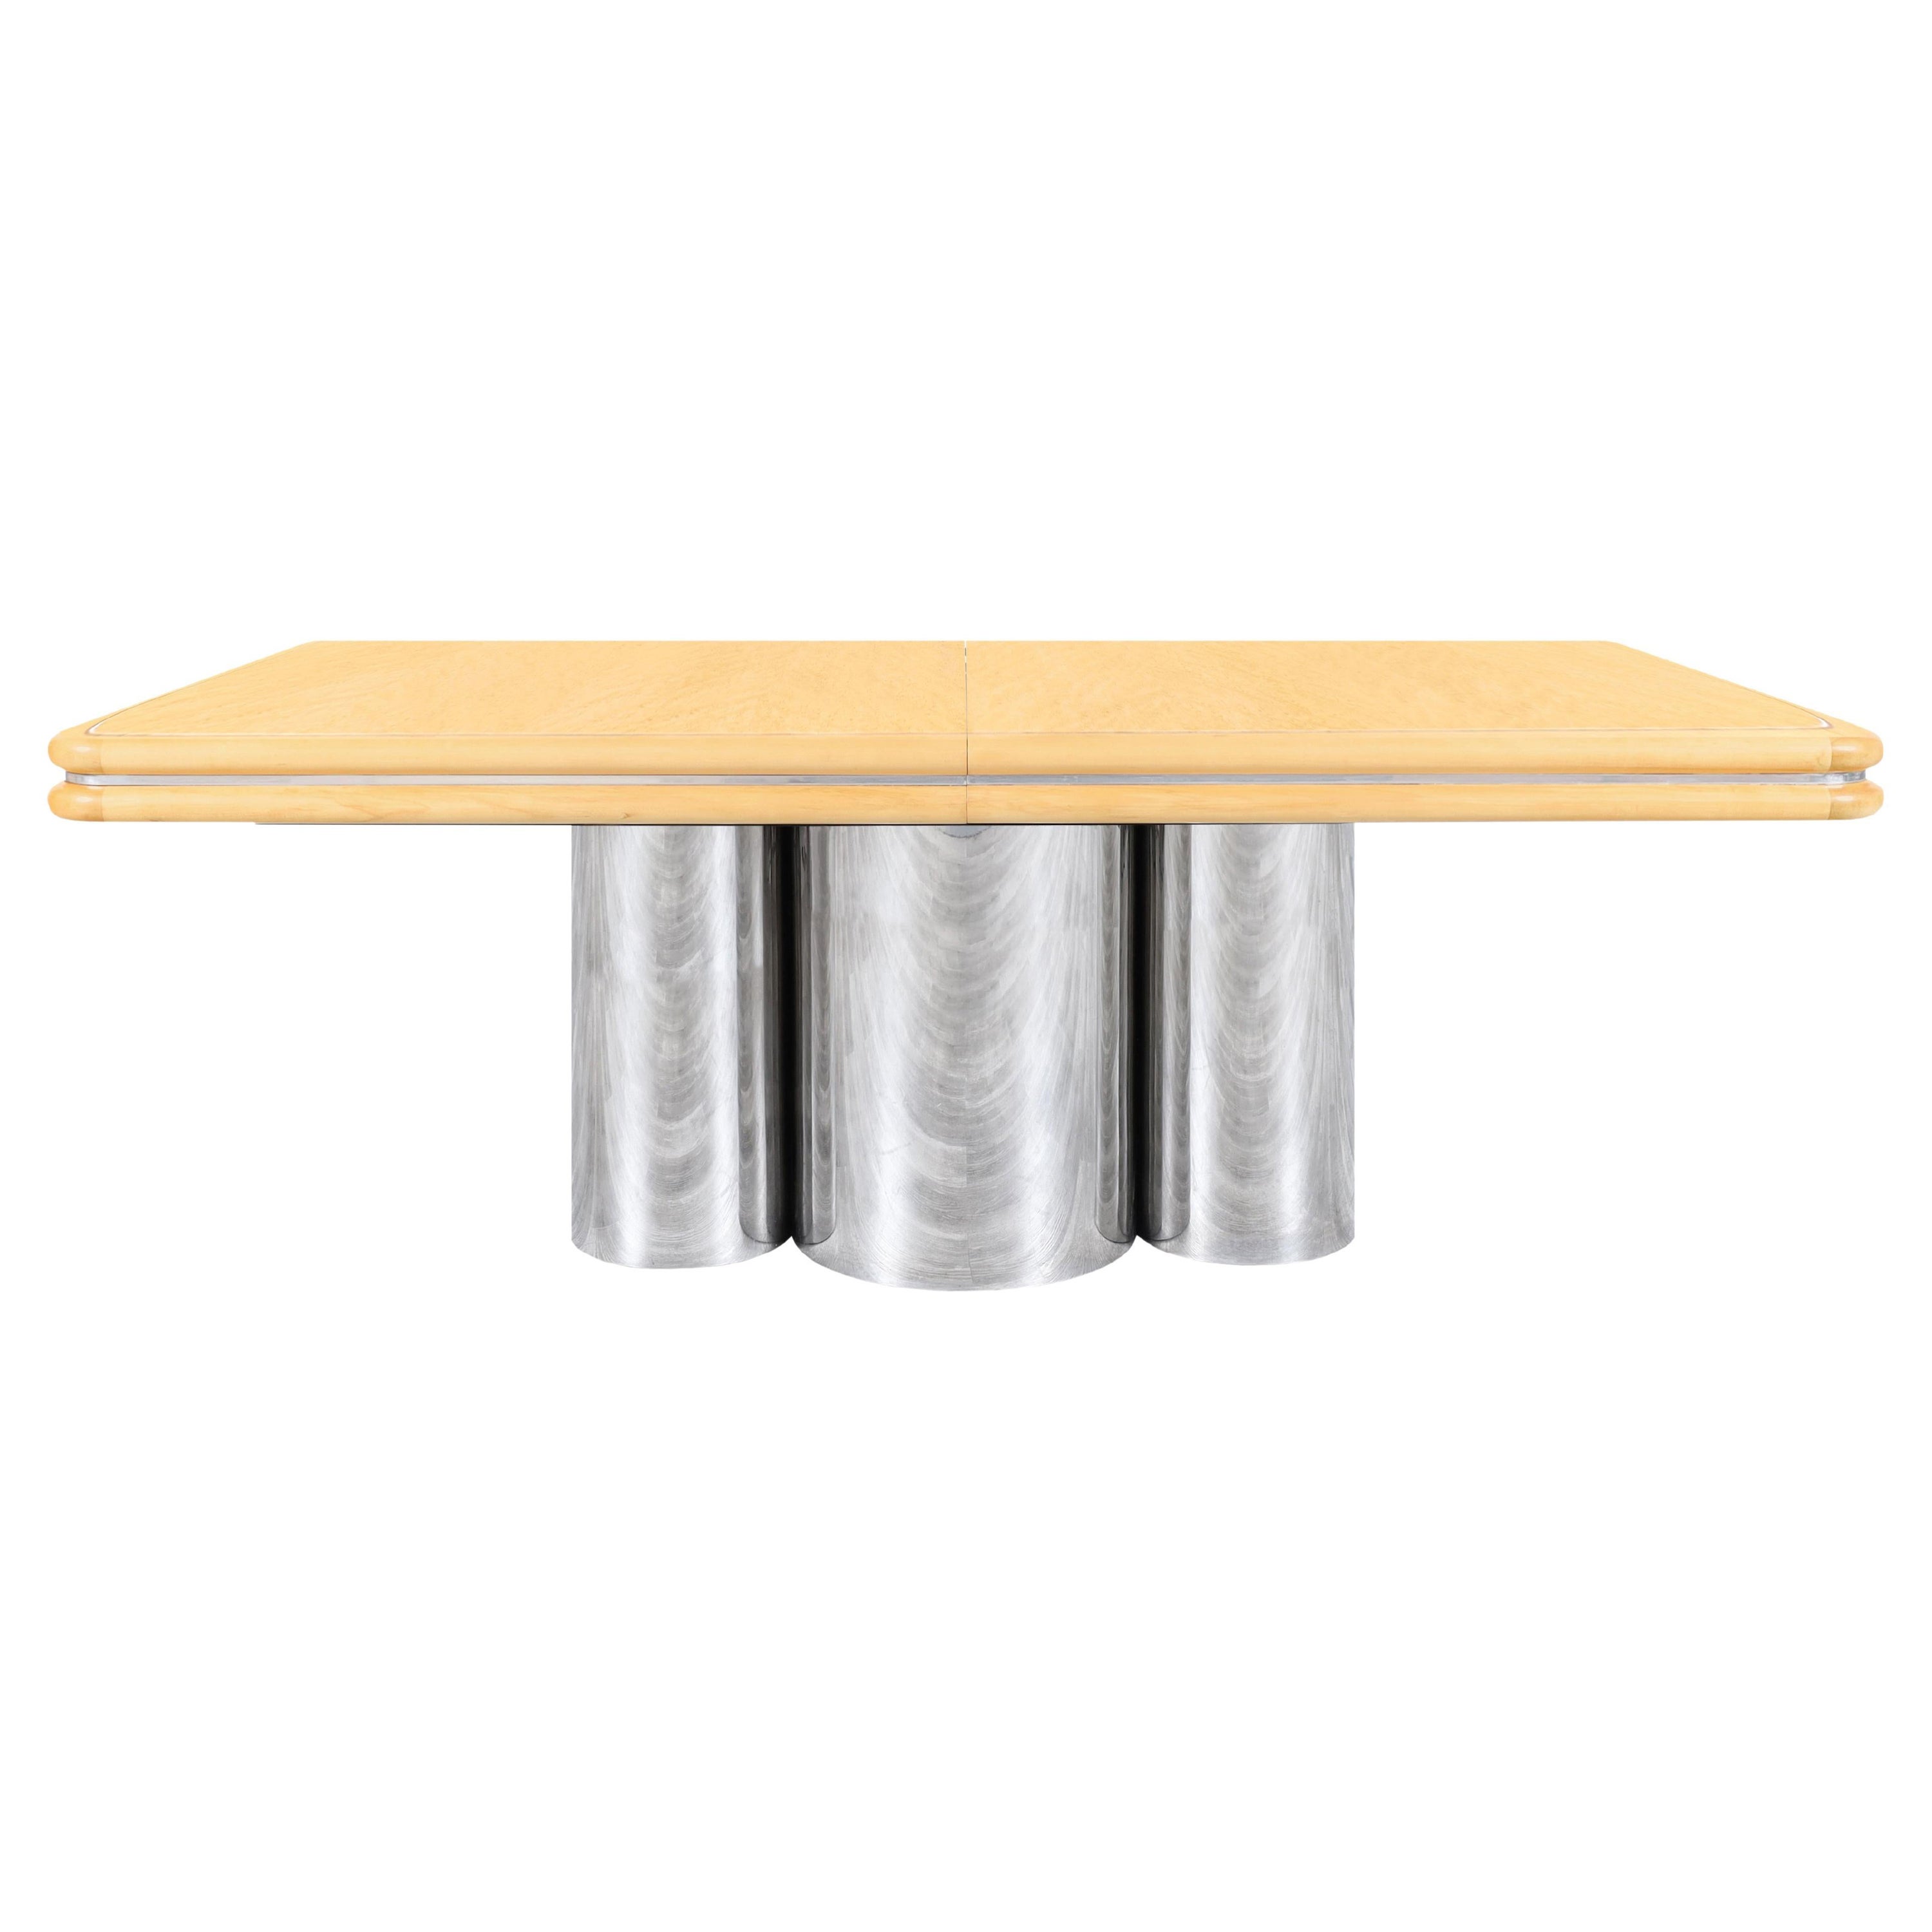 Monumental "Radial" Dining Table by Stanley Jay Friedman for Brueton